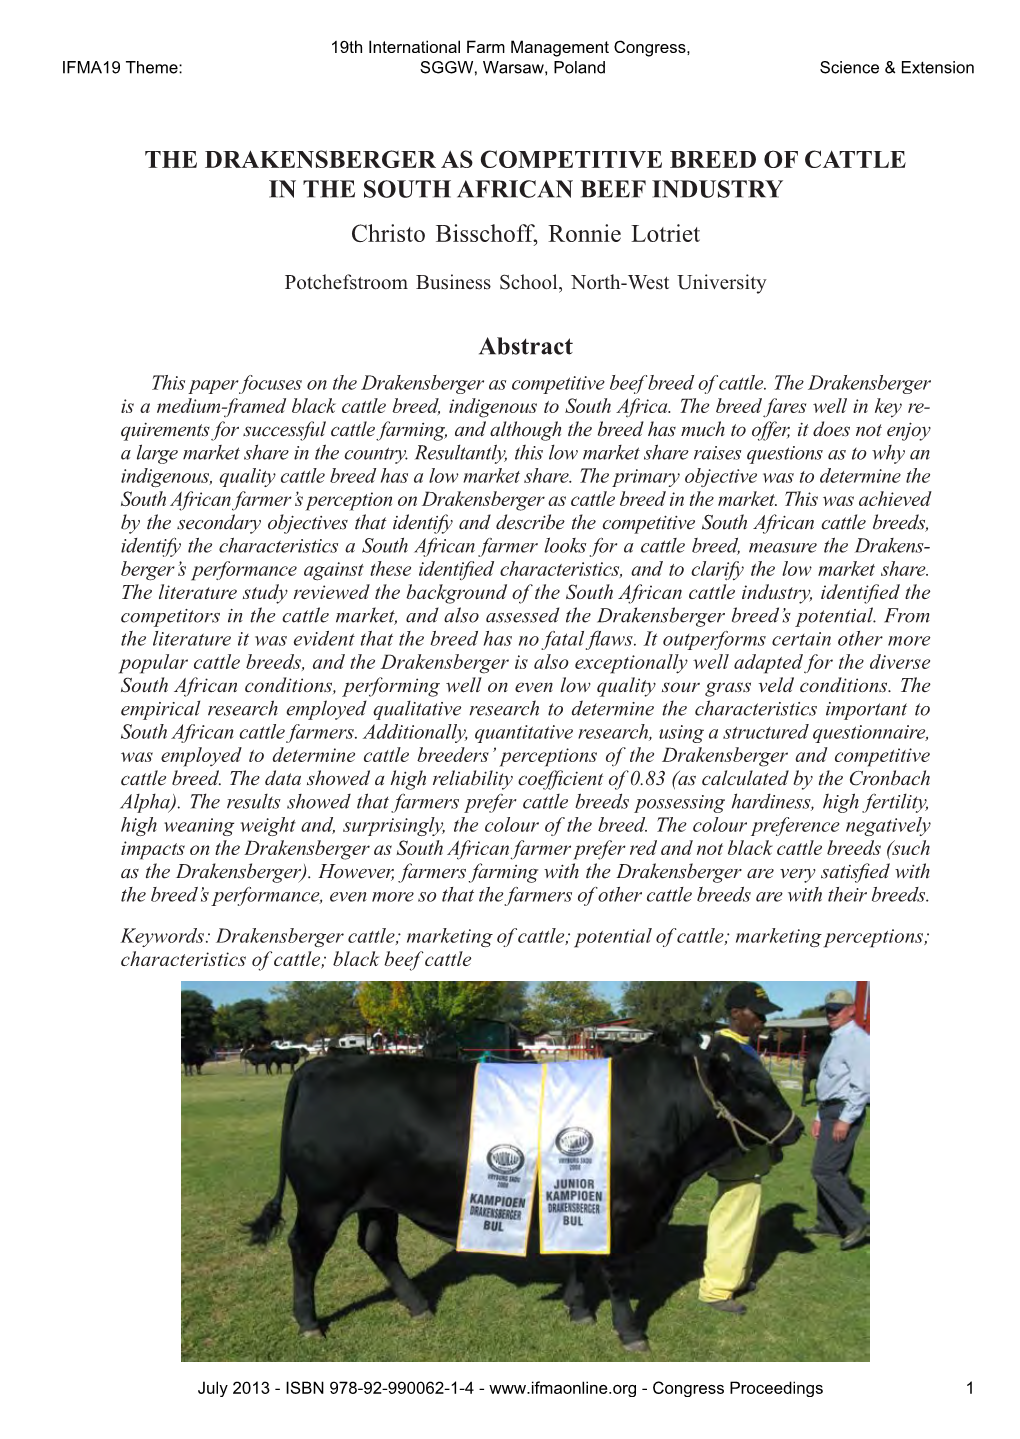 The Drakensberger As Competitive Breed of Cattle in the South African Beef Industry 39